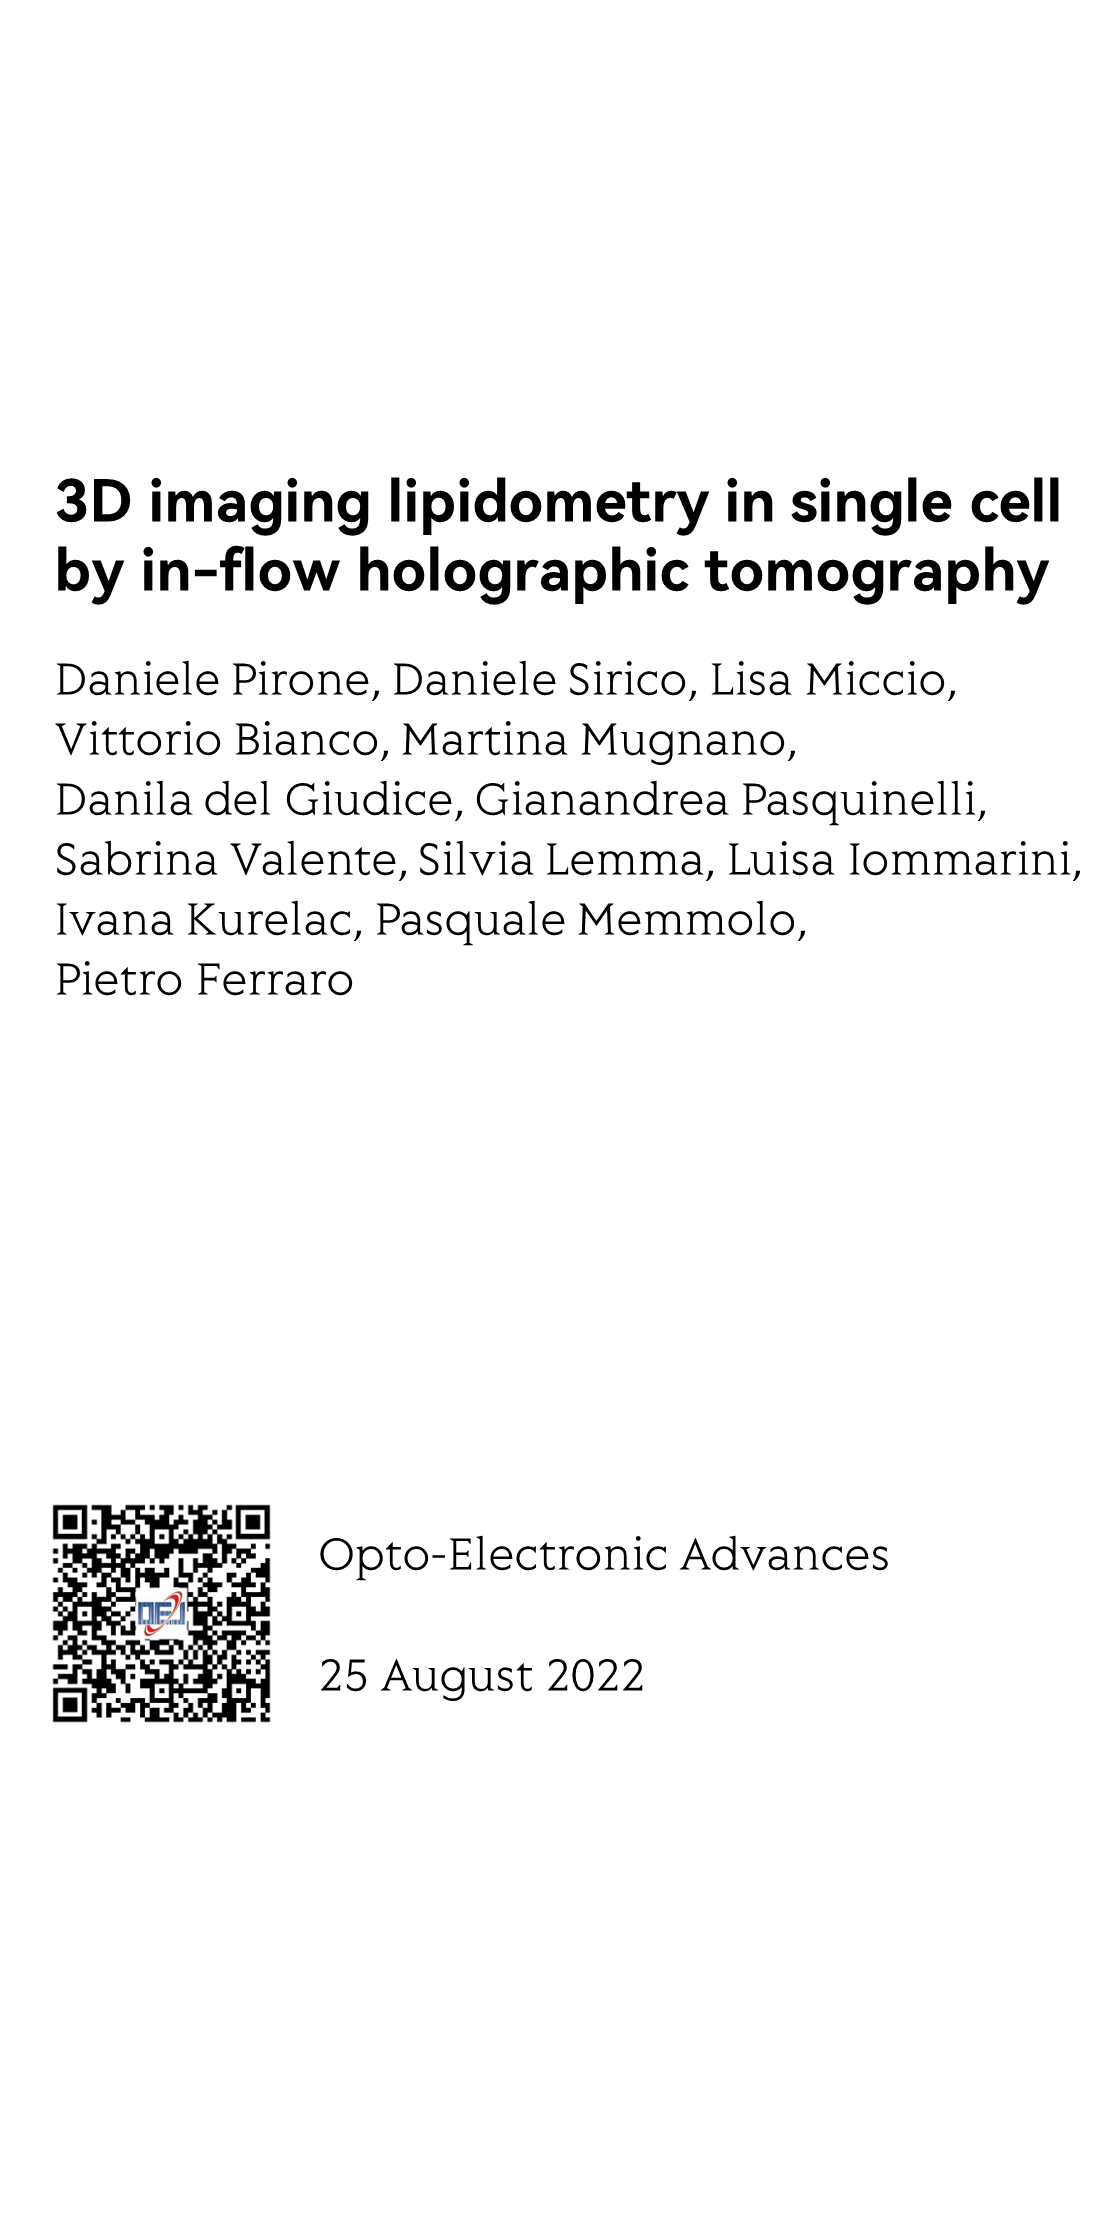 3D imaging lipidometry in single cell by in-flow holographic tomography_1